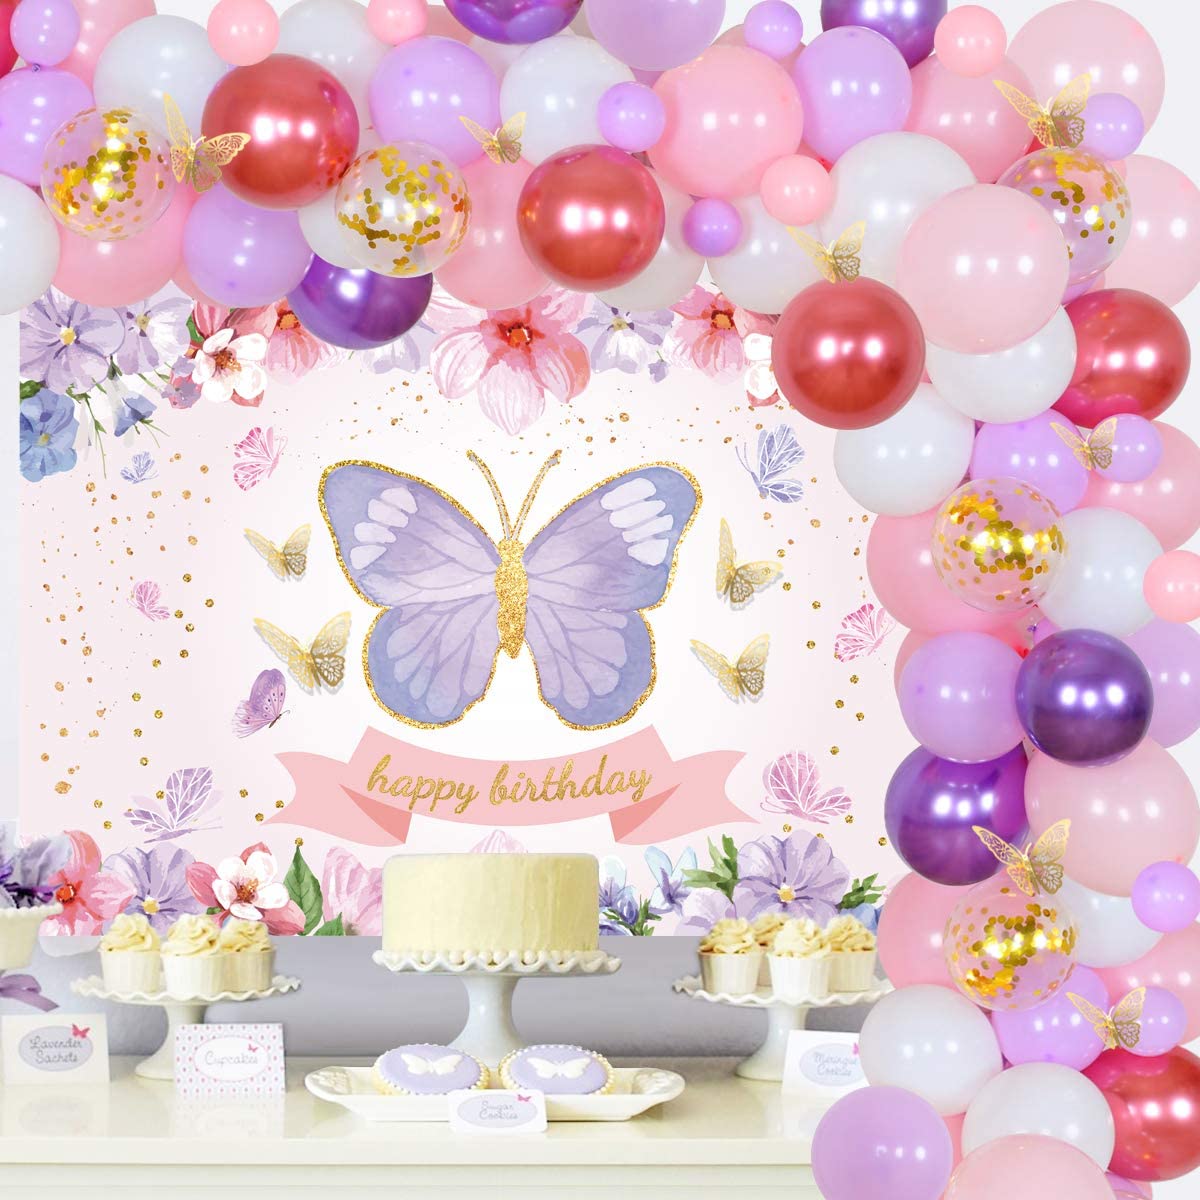 Butterfly Birthday Party Decorations for Girls – Butterfly Balloon Garland Arch Kit Happy Birthday Backdrop, Pink Purple Gold Confetti Balloons for Garden Floral Birthday Party Supplies – Homefurniturelife Online Store